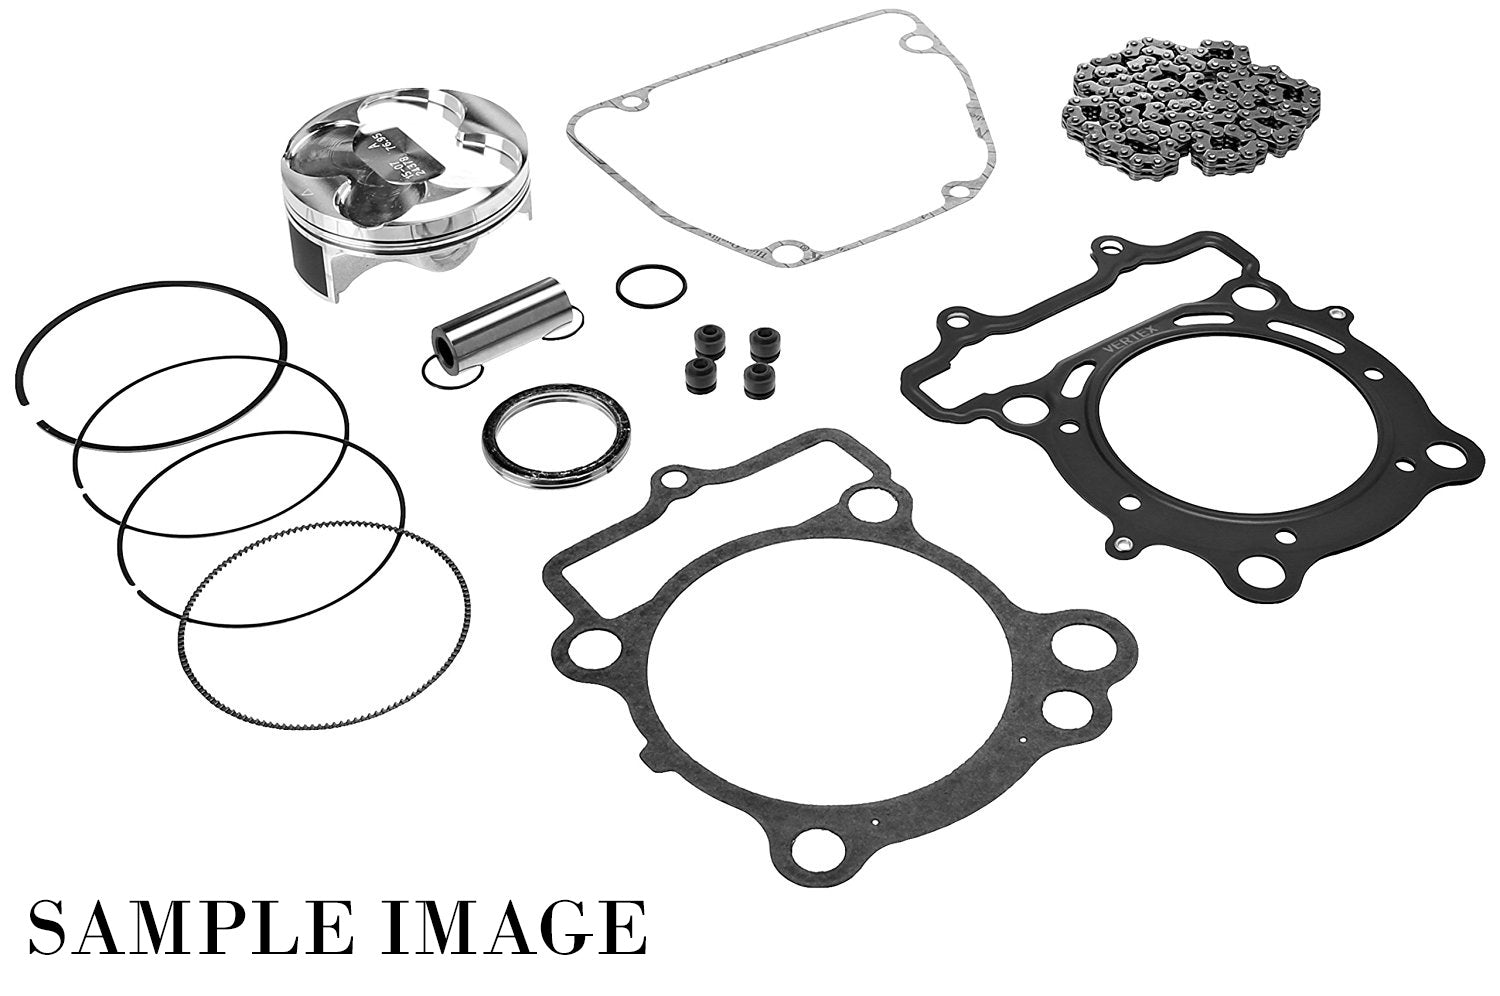 *Topend Kit Vertex Piston Rings Pins Circlips Topend Gaskets & Cam Chain Yamaha Yz450F 2020 96.96Mm